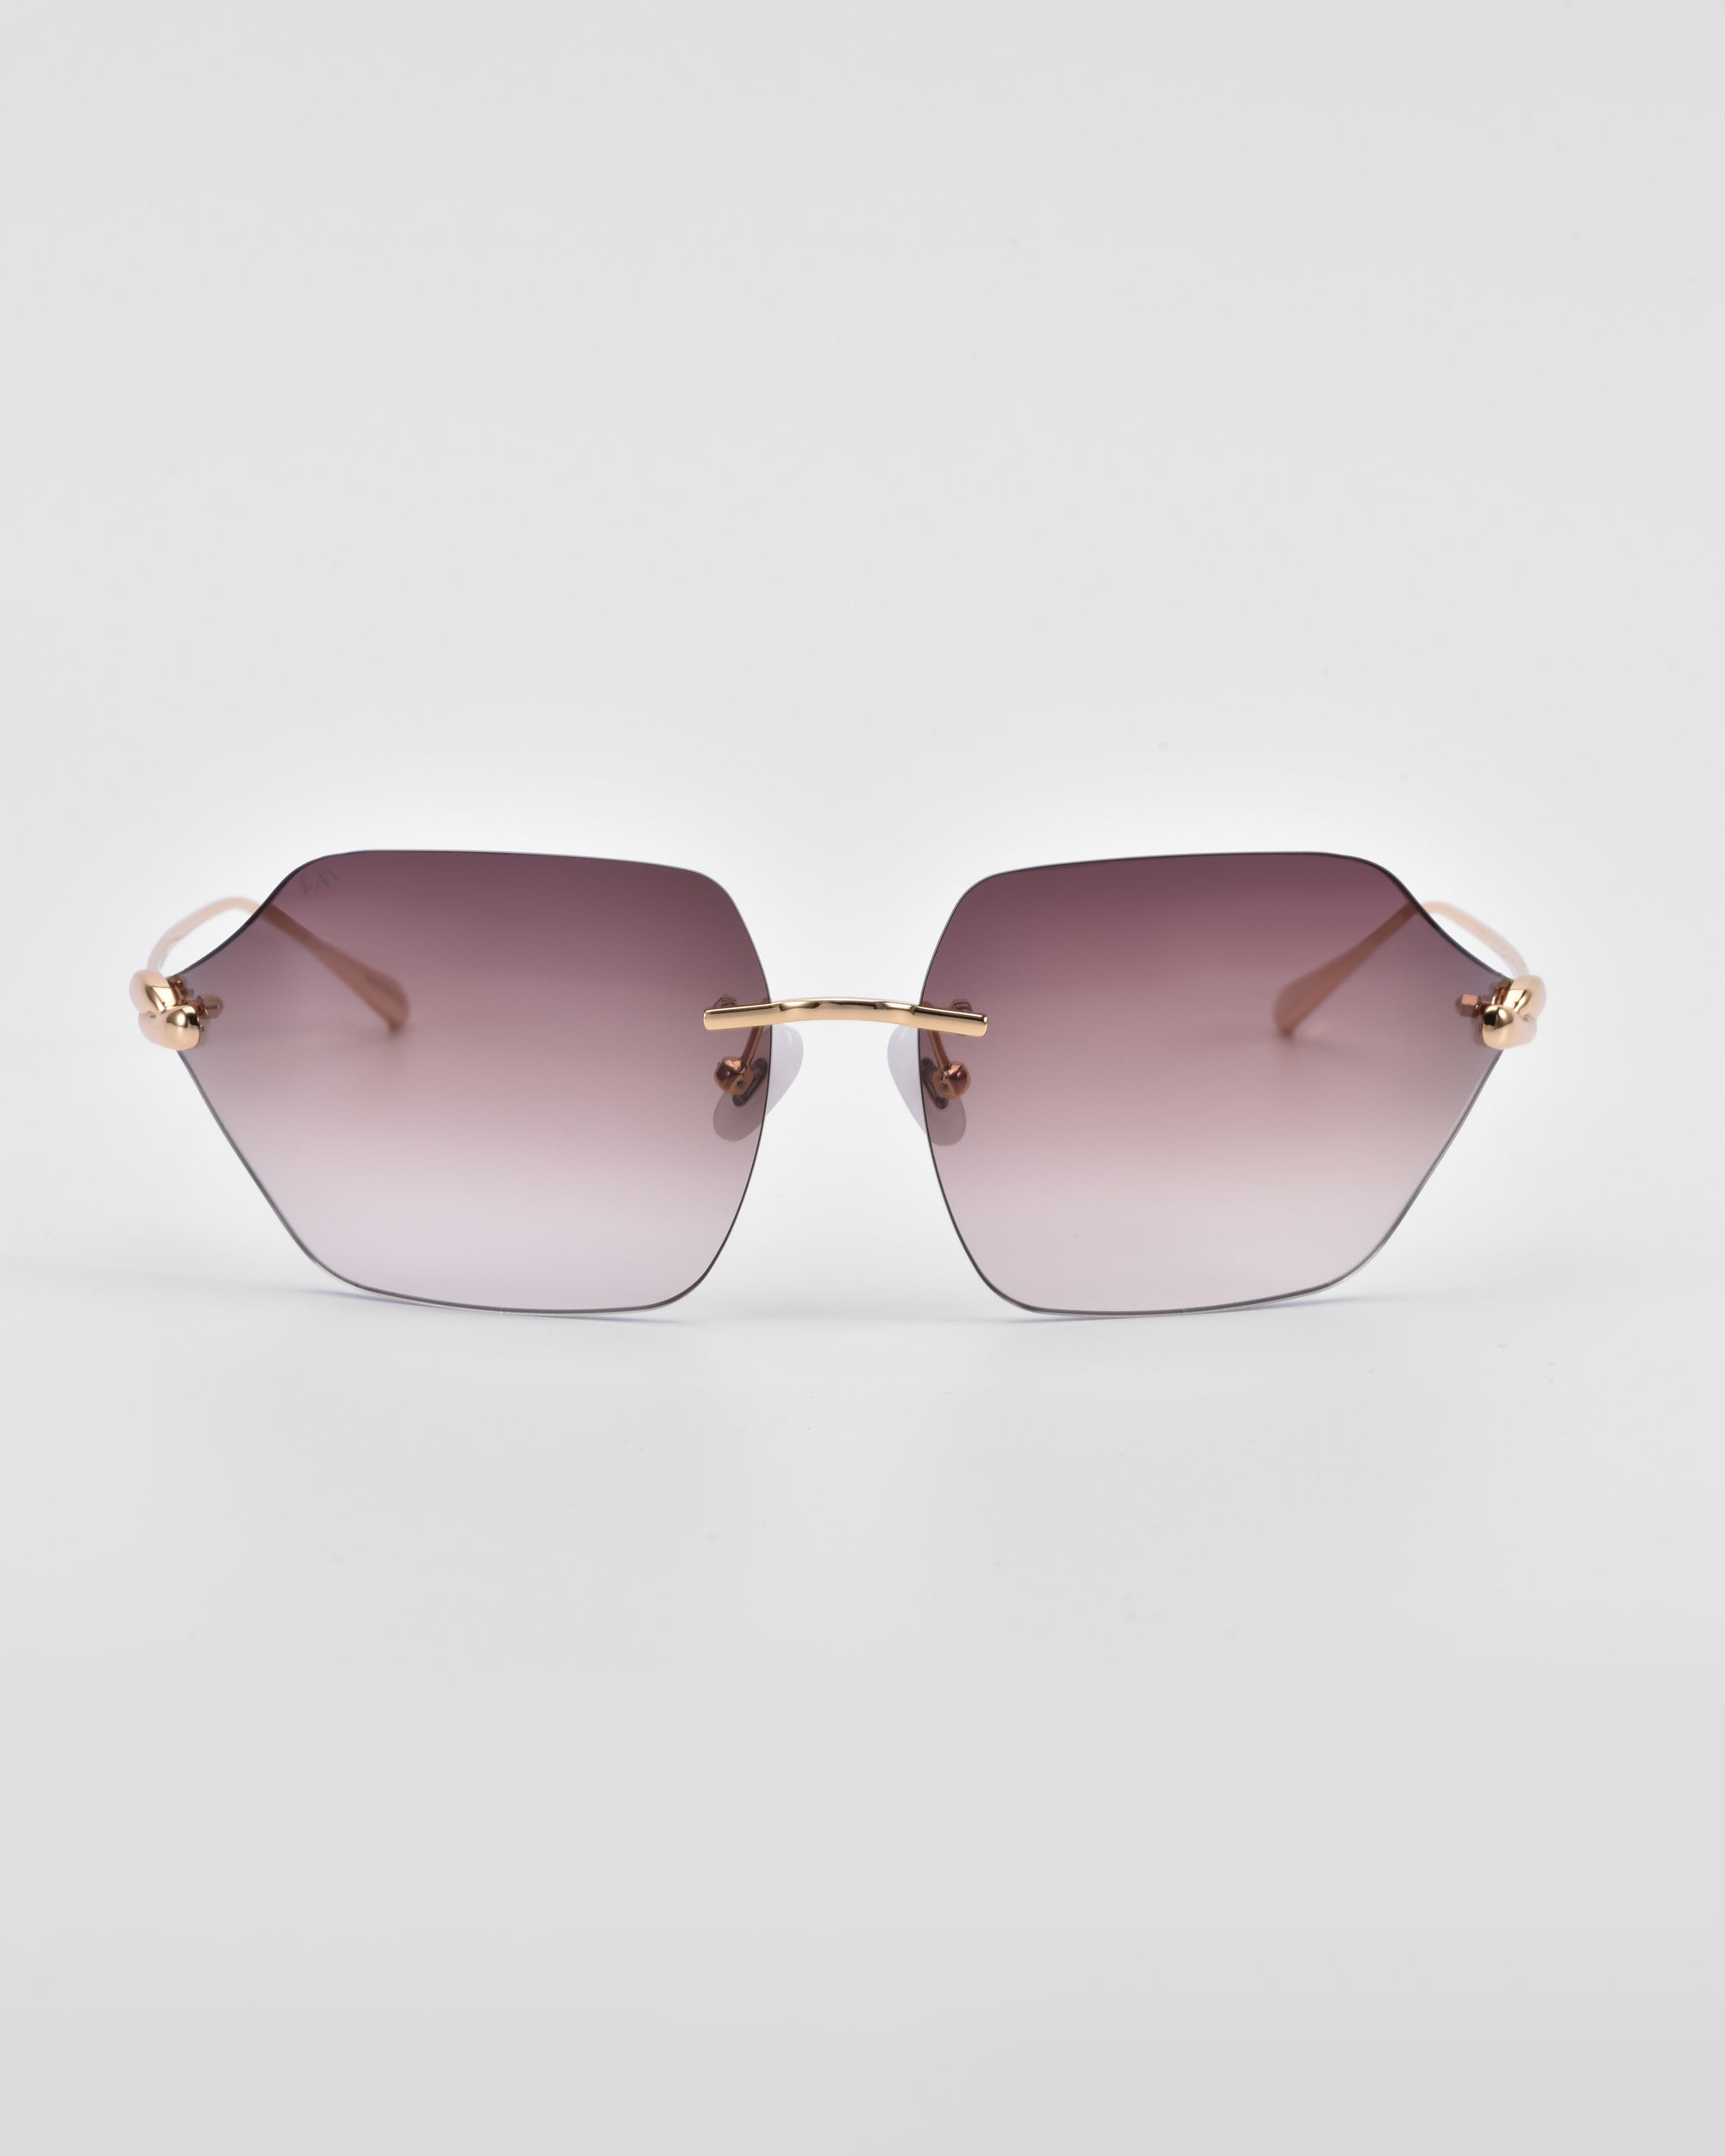 A pair of stylish, oversized hexagonal Serpent II sunglasses from For Art's Sake® with gradient lenses that transition from dark purple at the top to lighter at the bottom. The sunglasses feature 18-karat gold plating on the temples and a sleek, minimalist design. They are set against a plain white background.